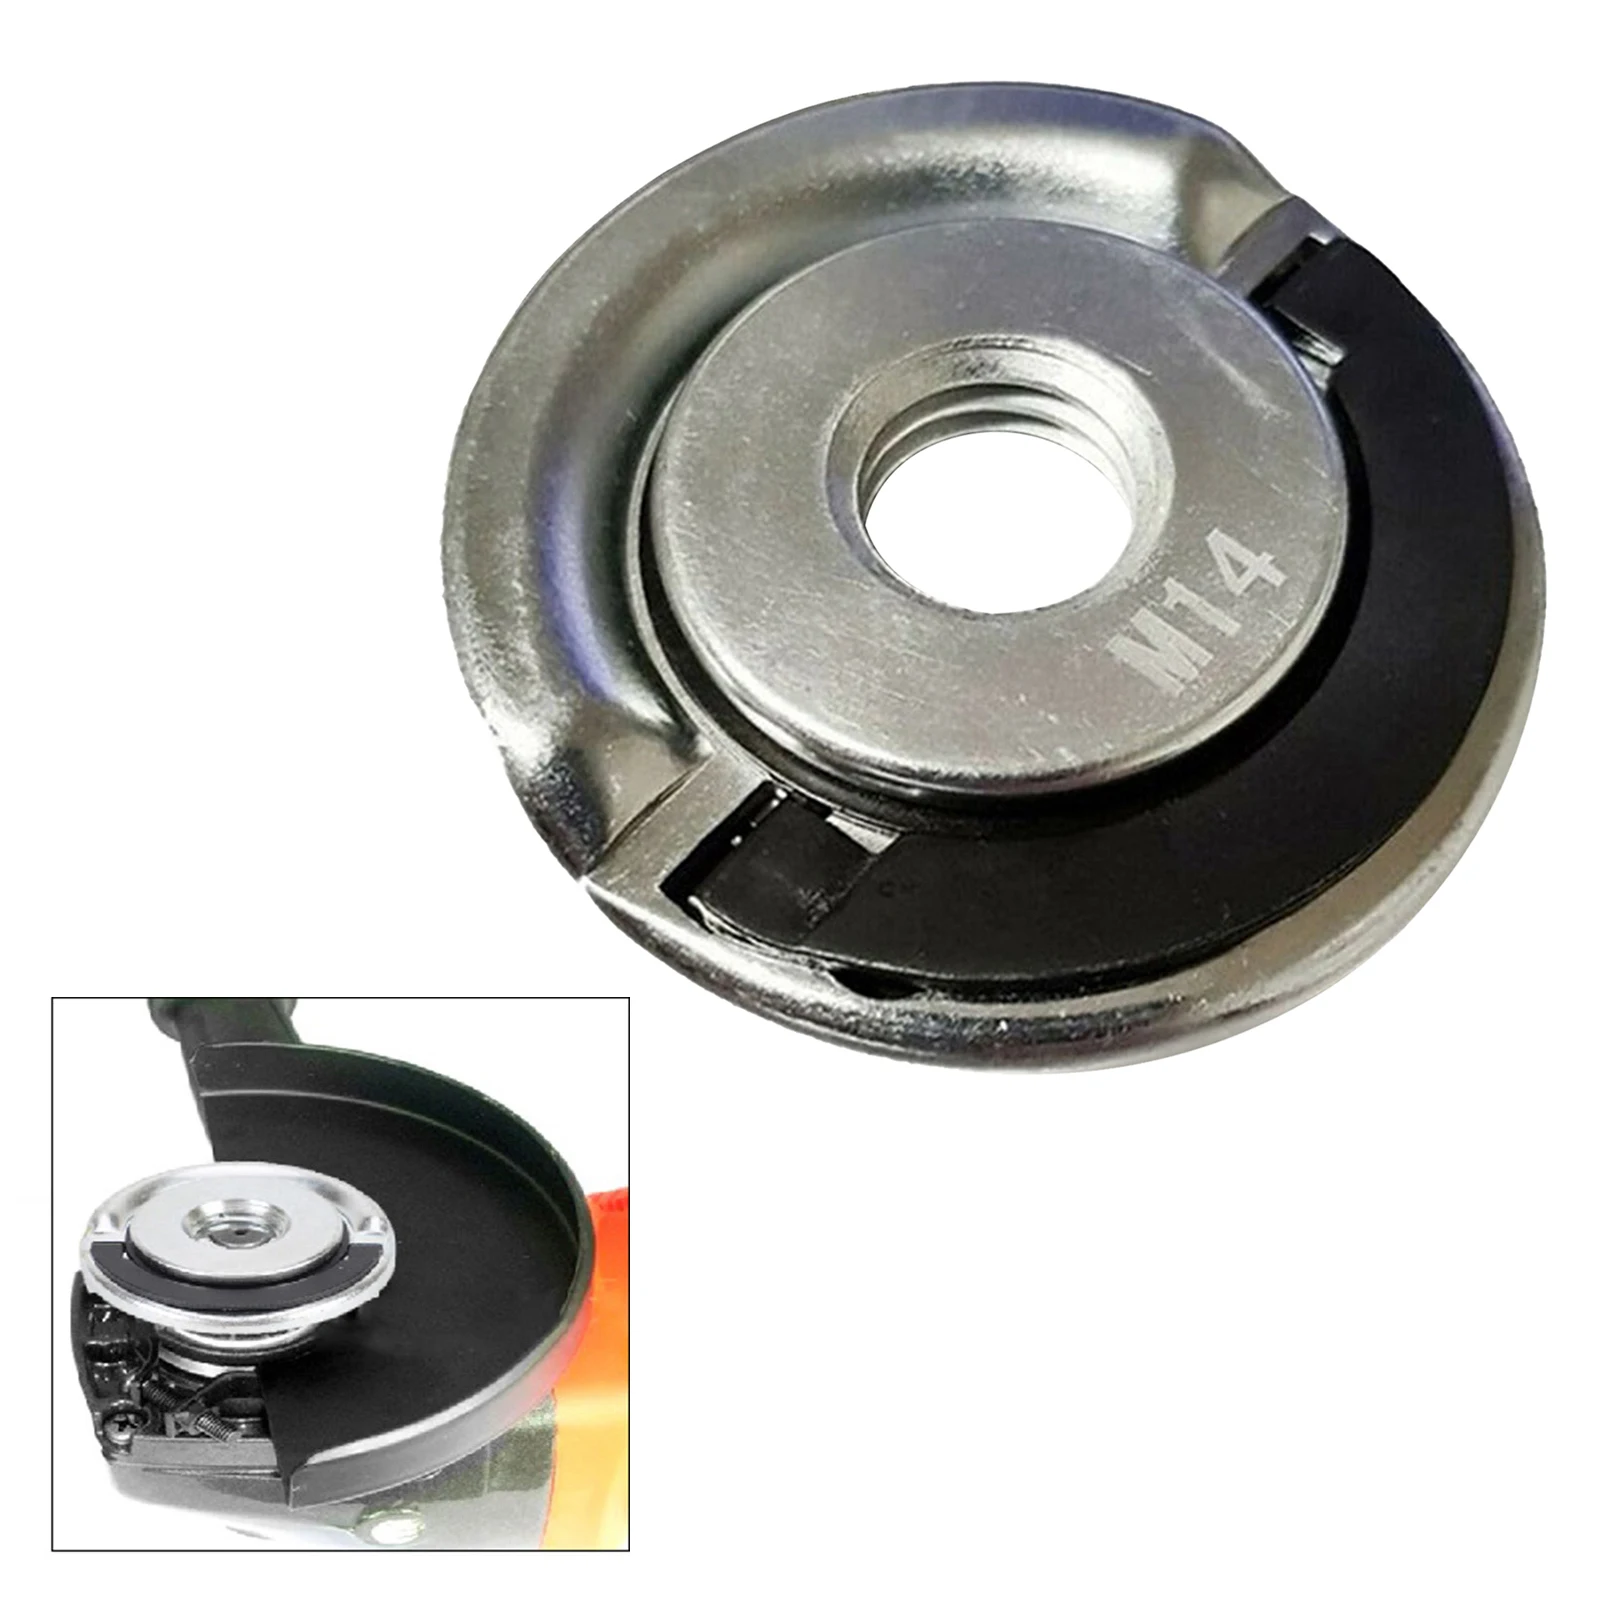 Angle Grinder Flange Lock Nuts M14 Thread Quick Change, Easy to Use and Easy to Install,Labor Saving